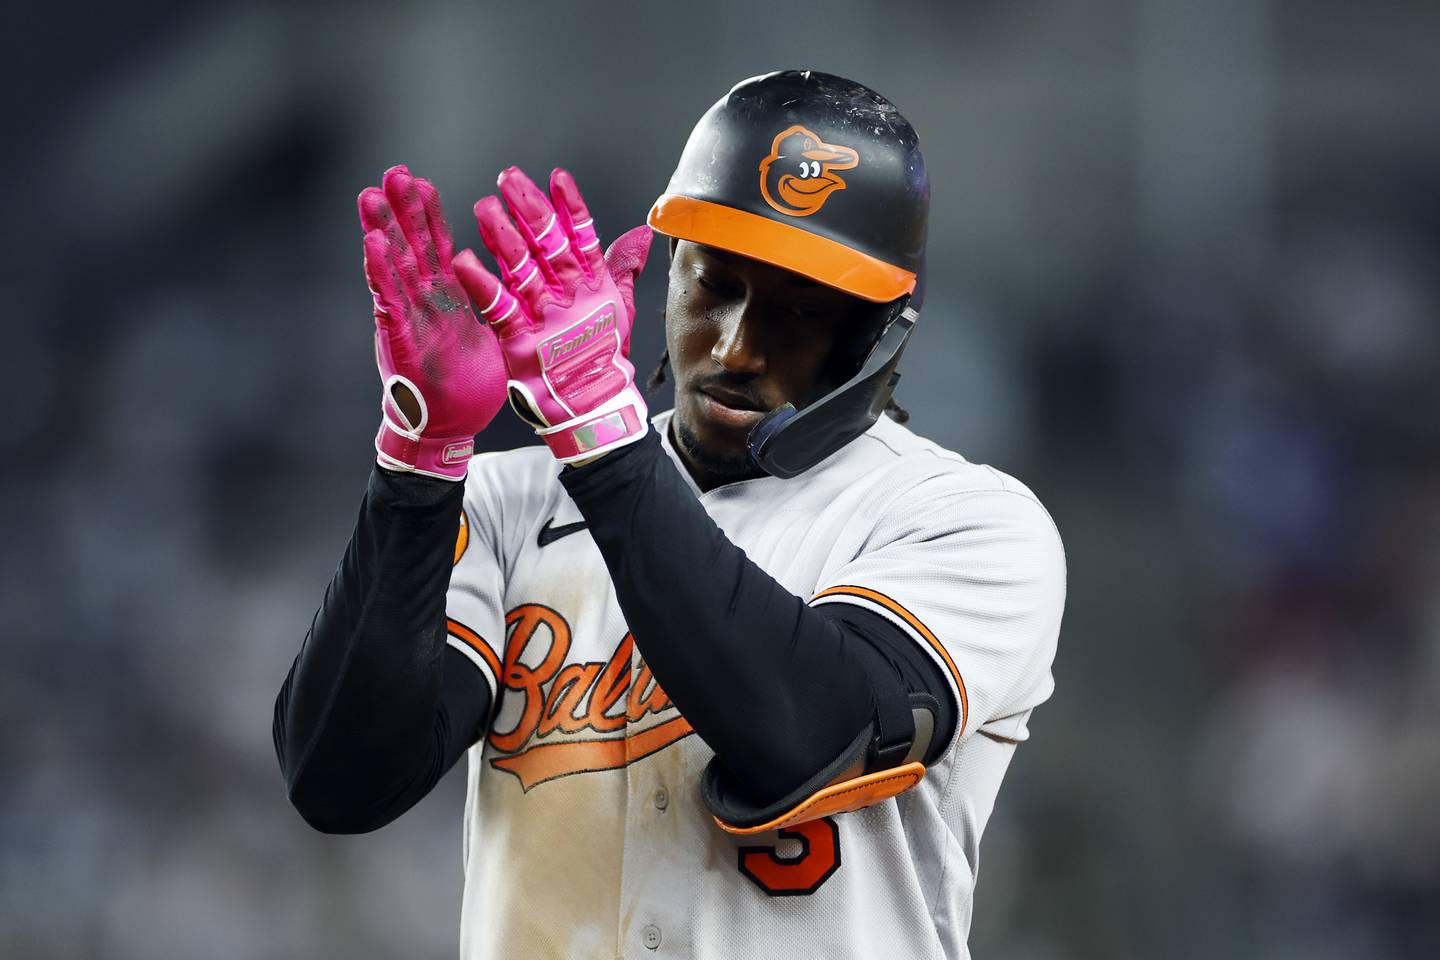 Jorge Mateo #3 of the Baltimore Orioles reacts after hitting a single during the seventh inning against the New York Yankees at Yankee Stadium on May 24, 2023 in the Bronx borough of New York City.